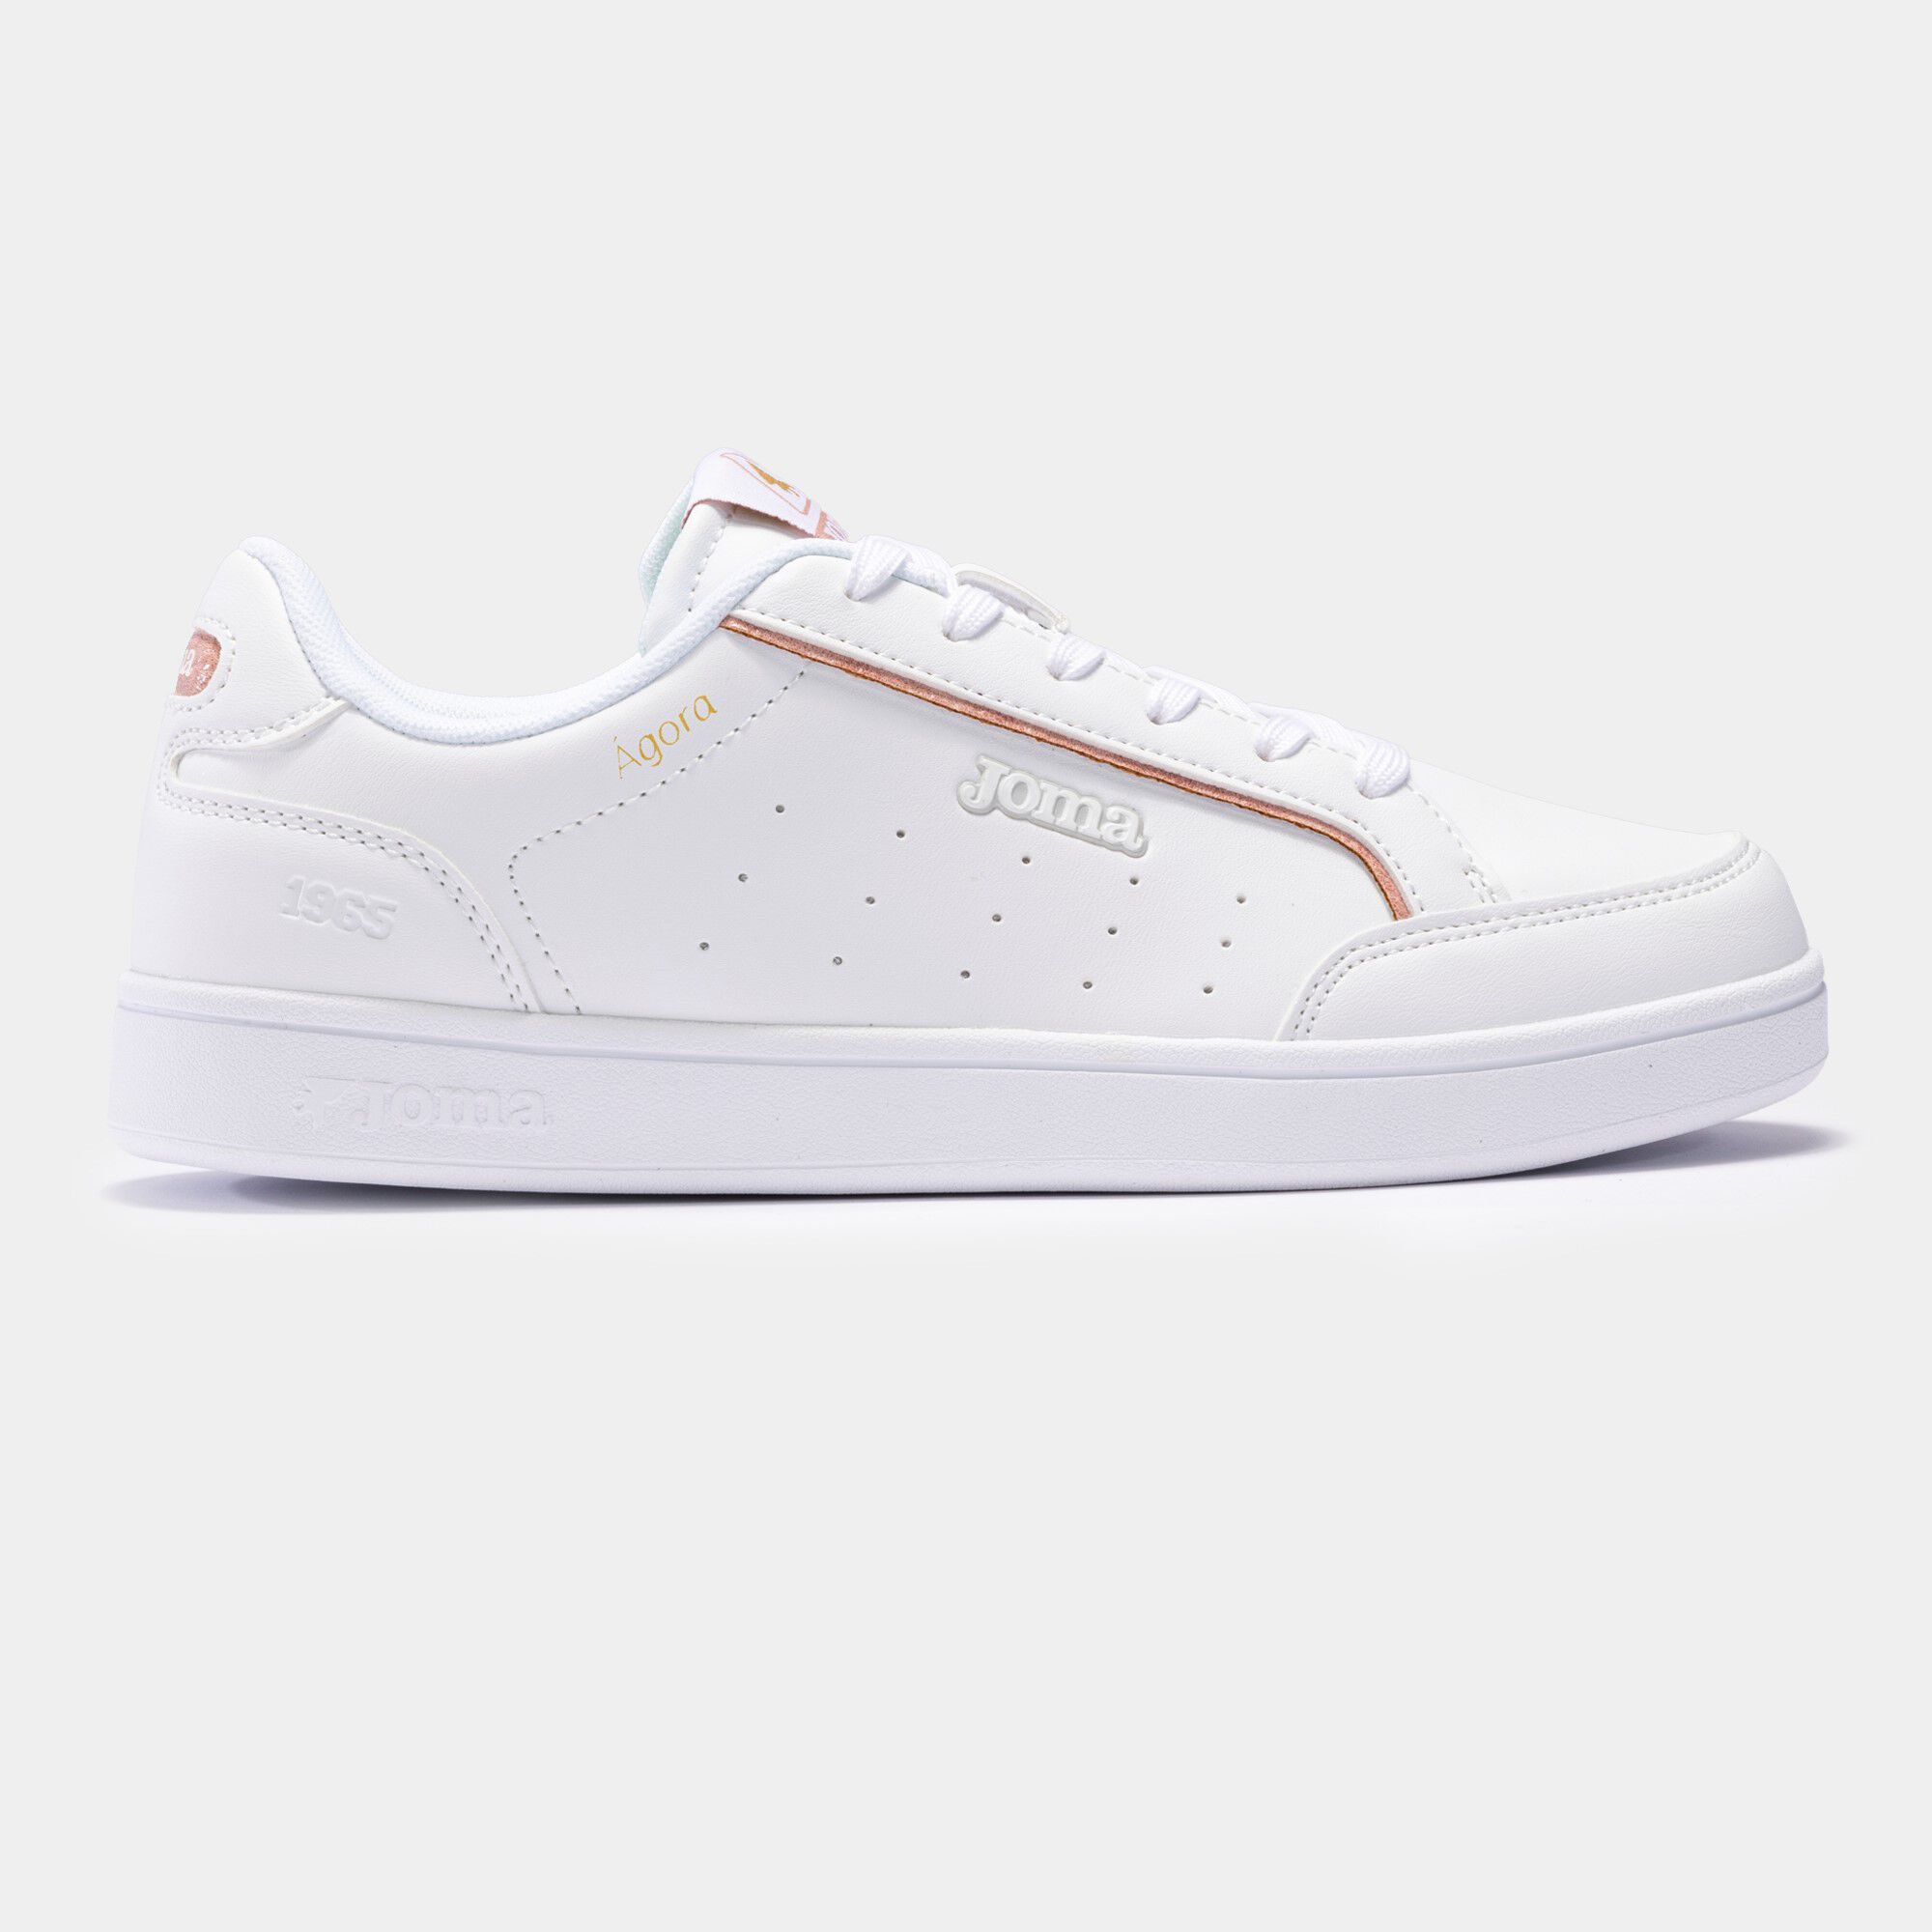 Casual shoes C.Agora Lady 23 woman white pink